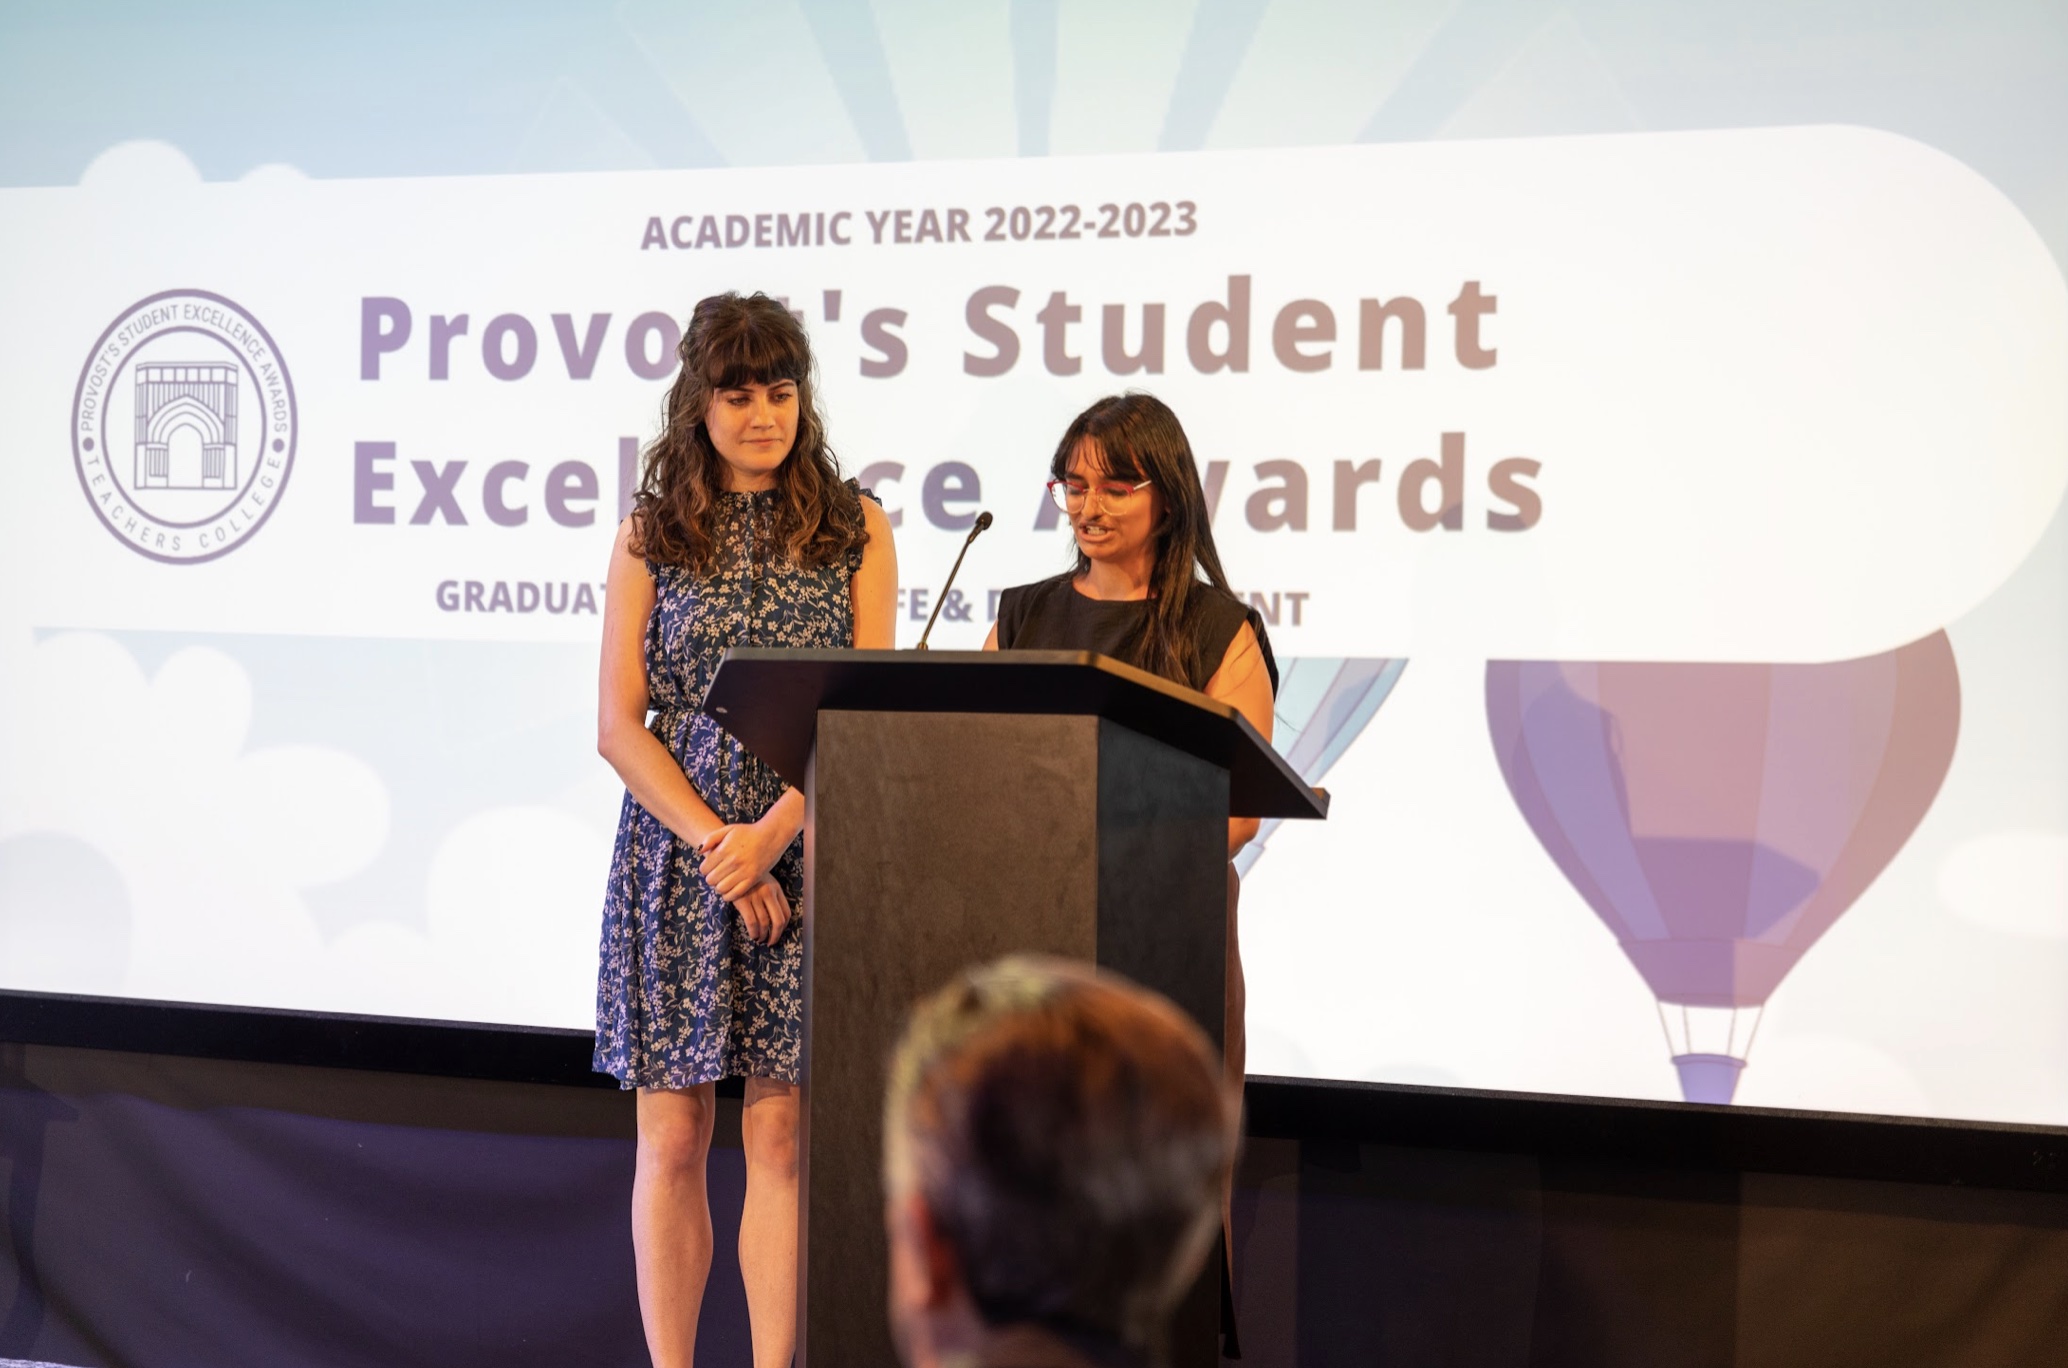 Students presenting at Provost's Student Excellence Awards.